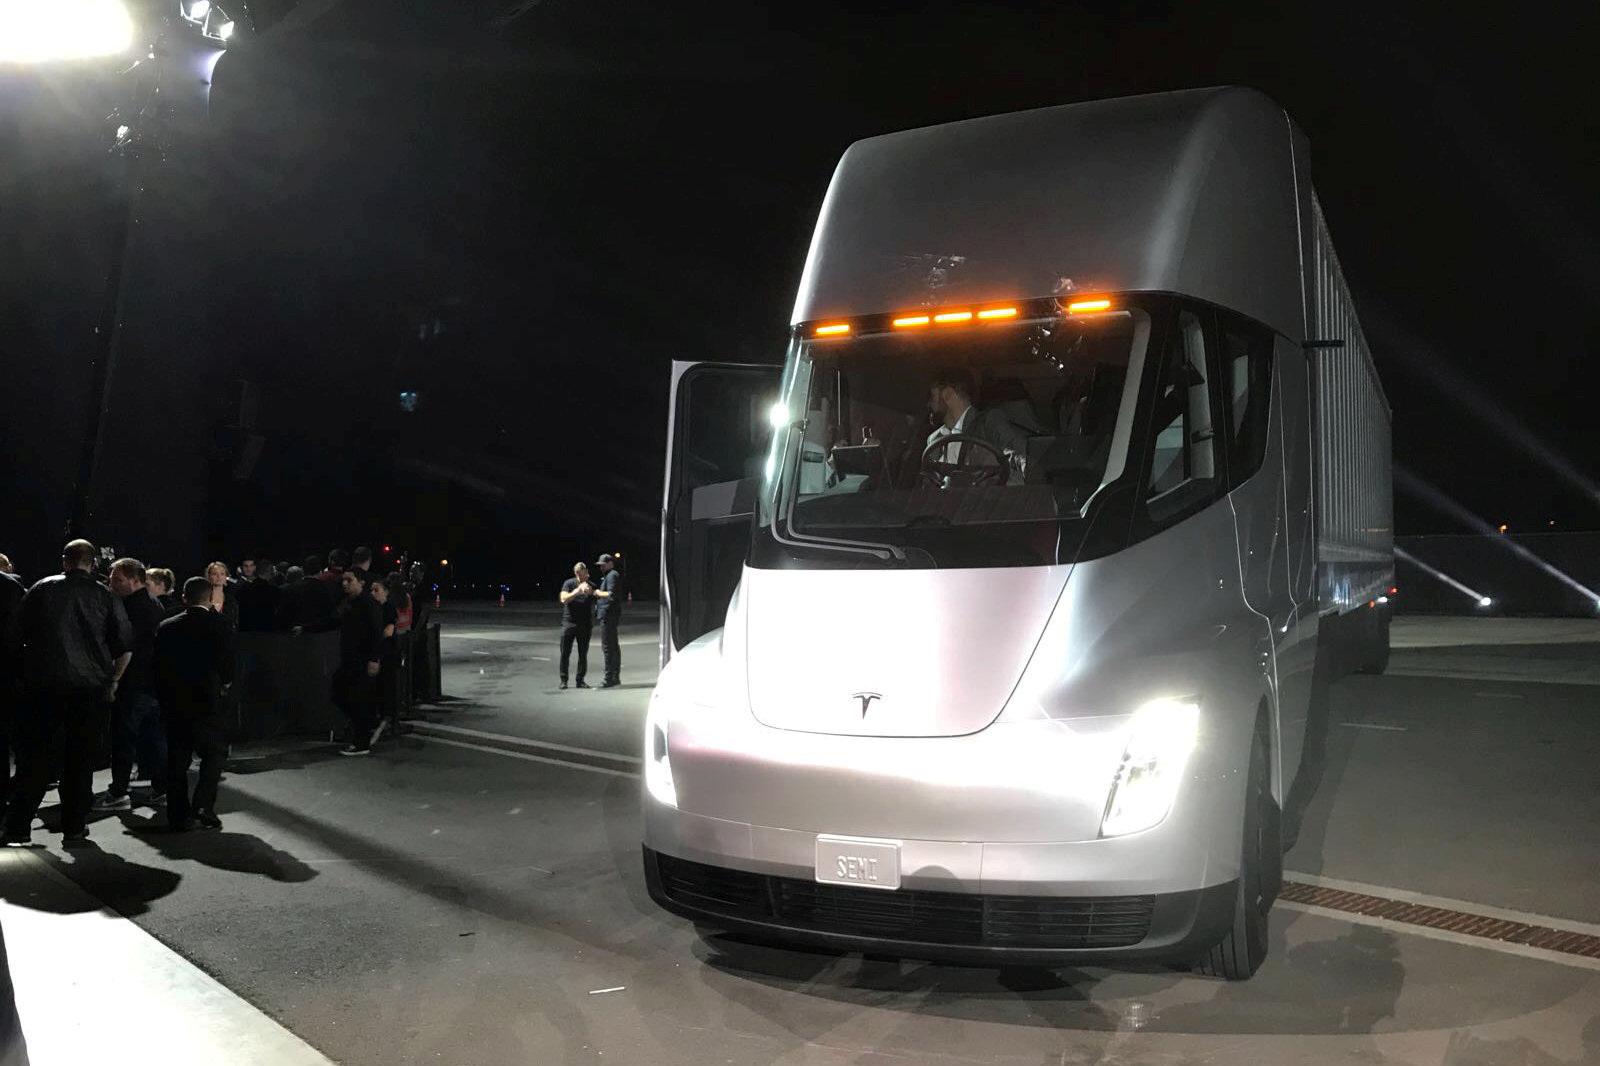 Tesla's new electric semi truck is unveiled during a presentation in Hawthorne, California, U.S., November 16, 2017. REUTERS/Alexandria Sage